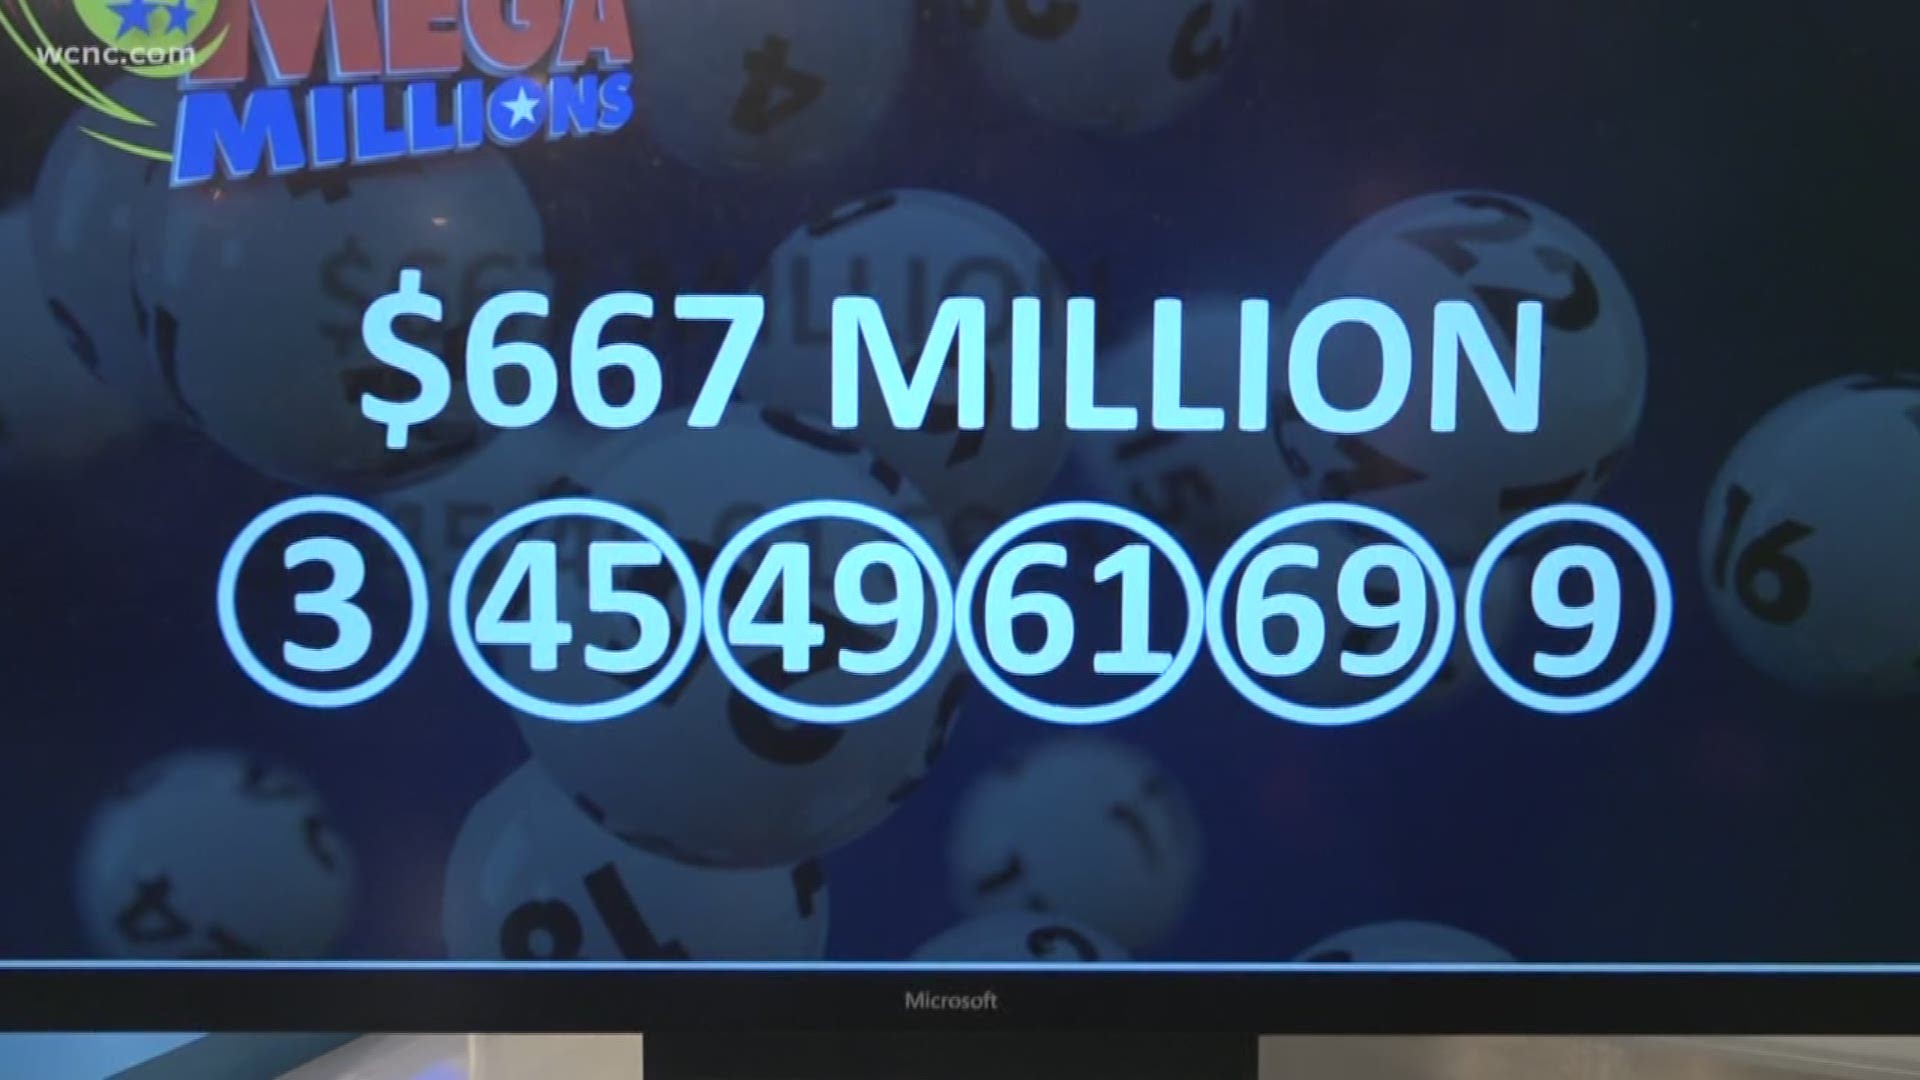 No one matched all six numbers in the drawing for over $600 million. Which means Friday's drawing will be for at least $868 million!